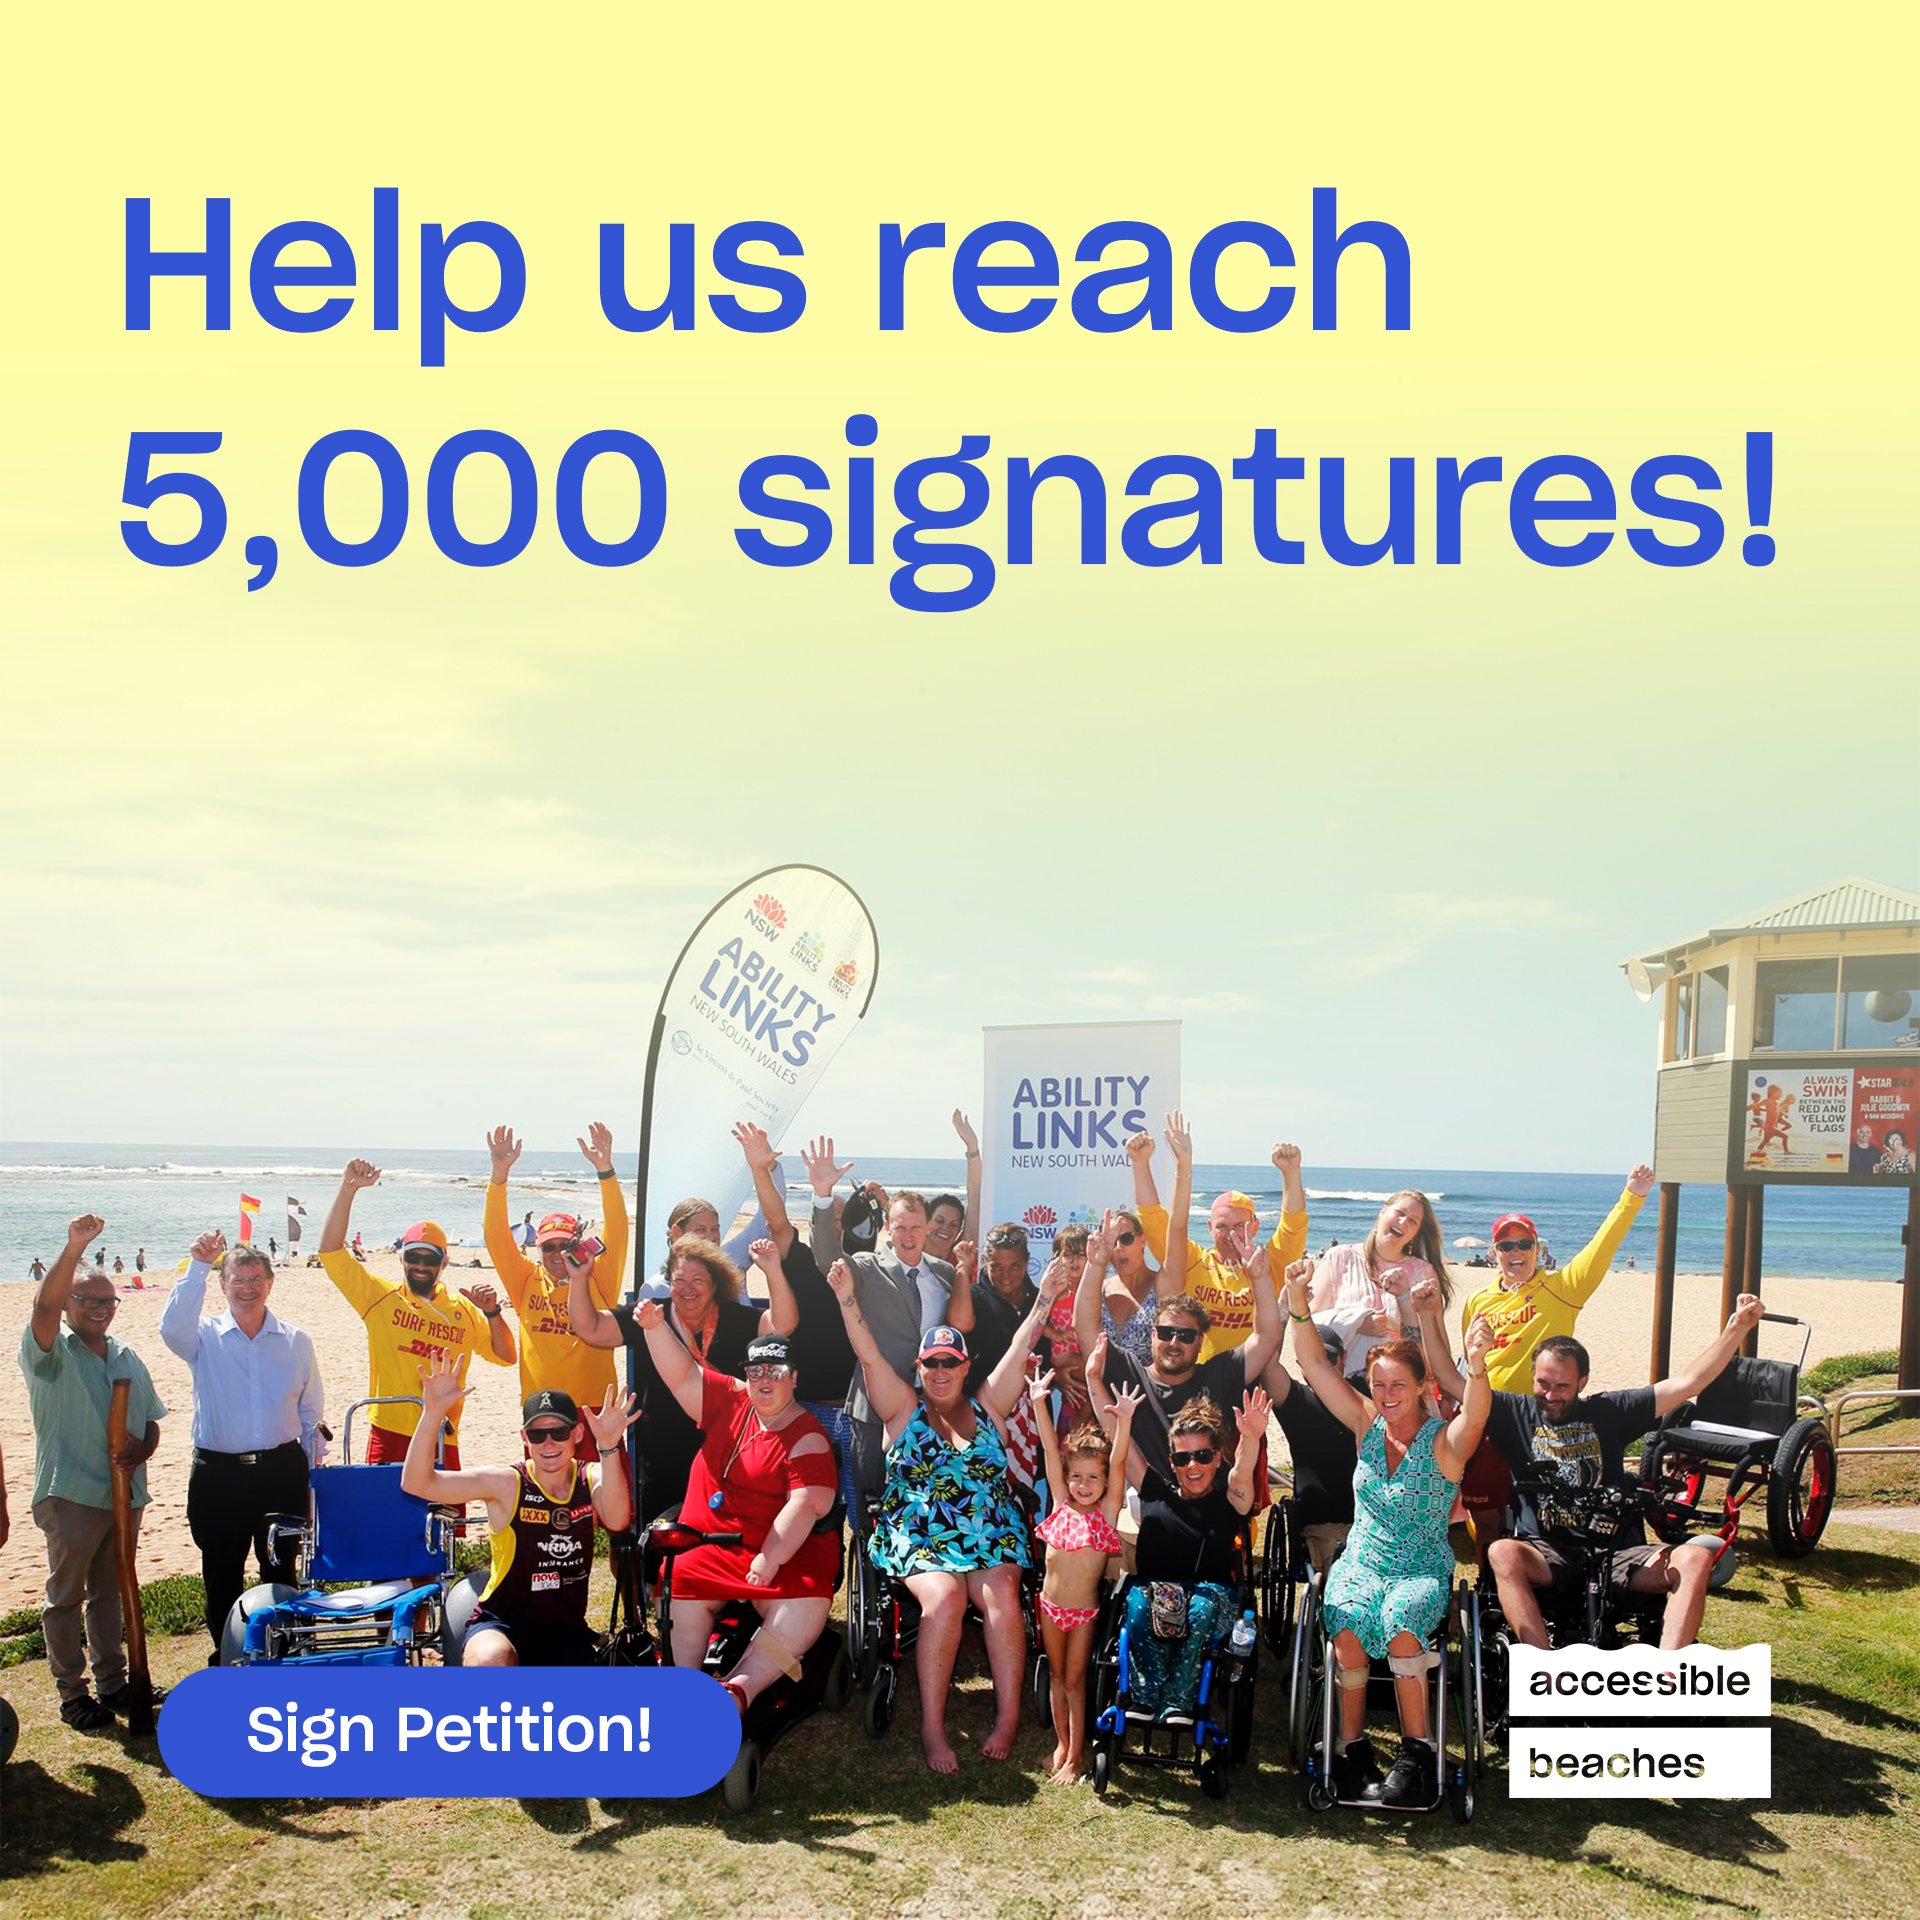 We need your help to reach 5,000 signatures on our petition calling on the government to raise funds for local beach accessibility projects! Sign and share the petition (link in our bio) to help us achieve this milestone 🏖️

ABA sends a heartfelt th